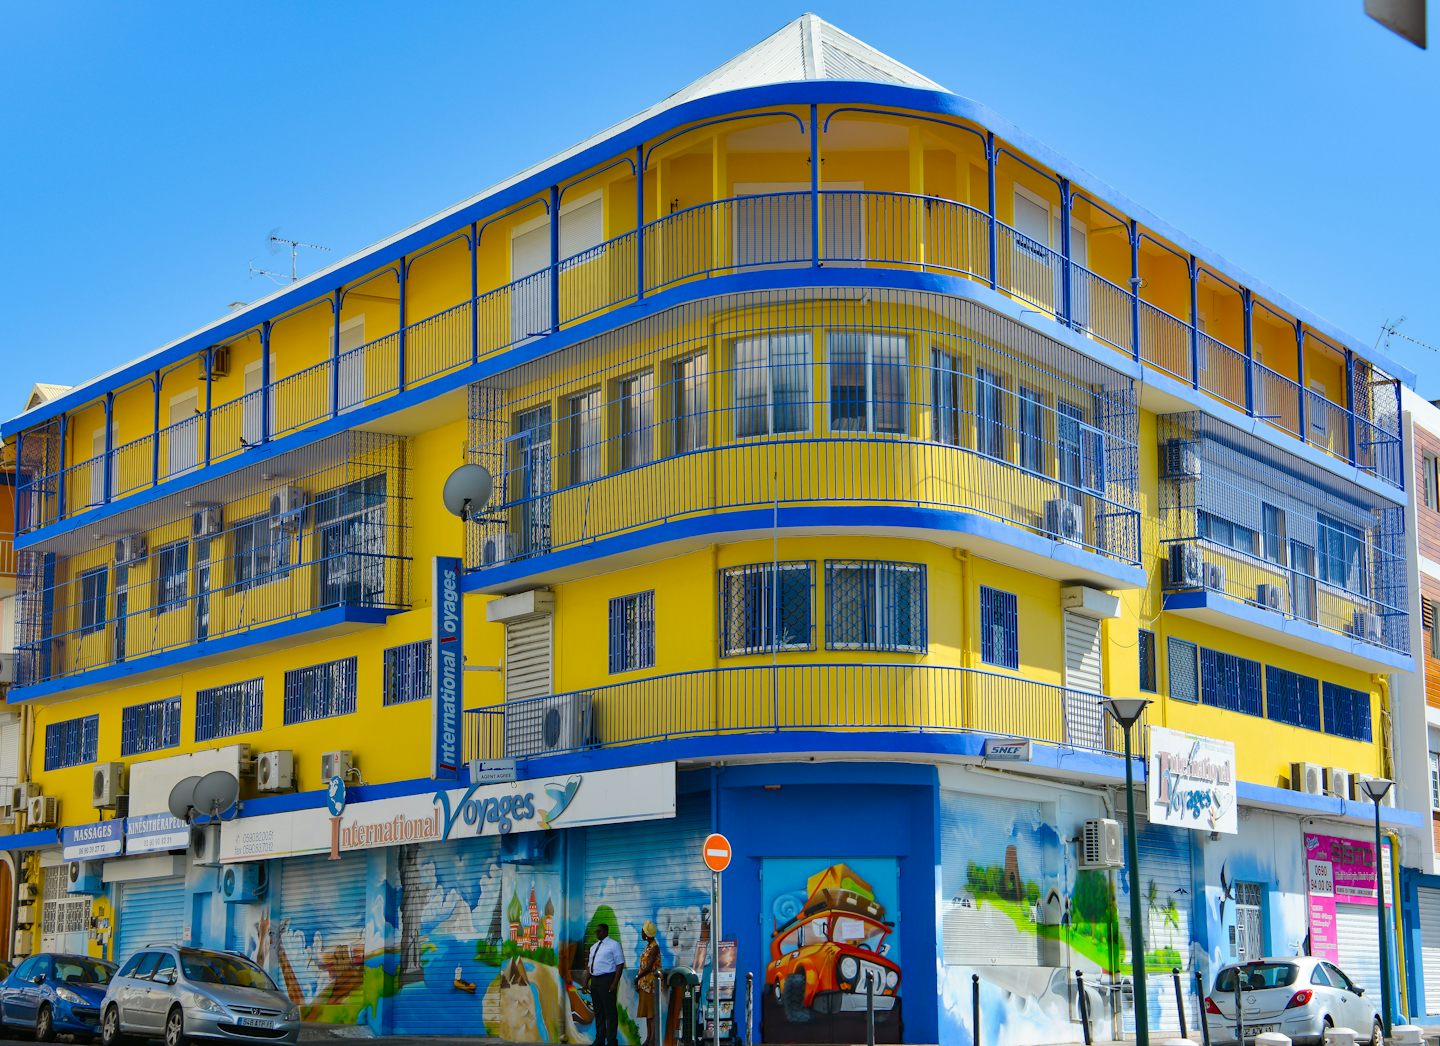 Bright Primary Colors in Guadeloupe